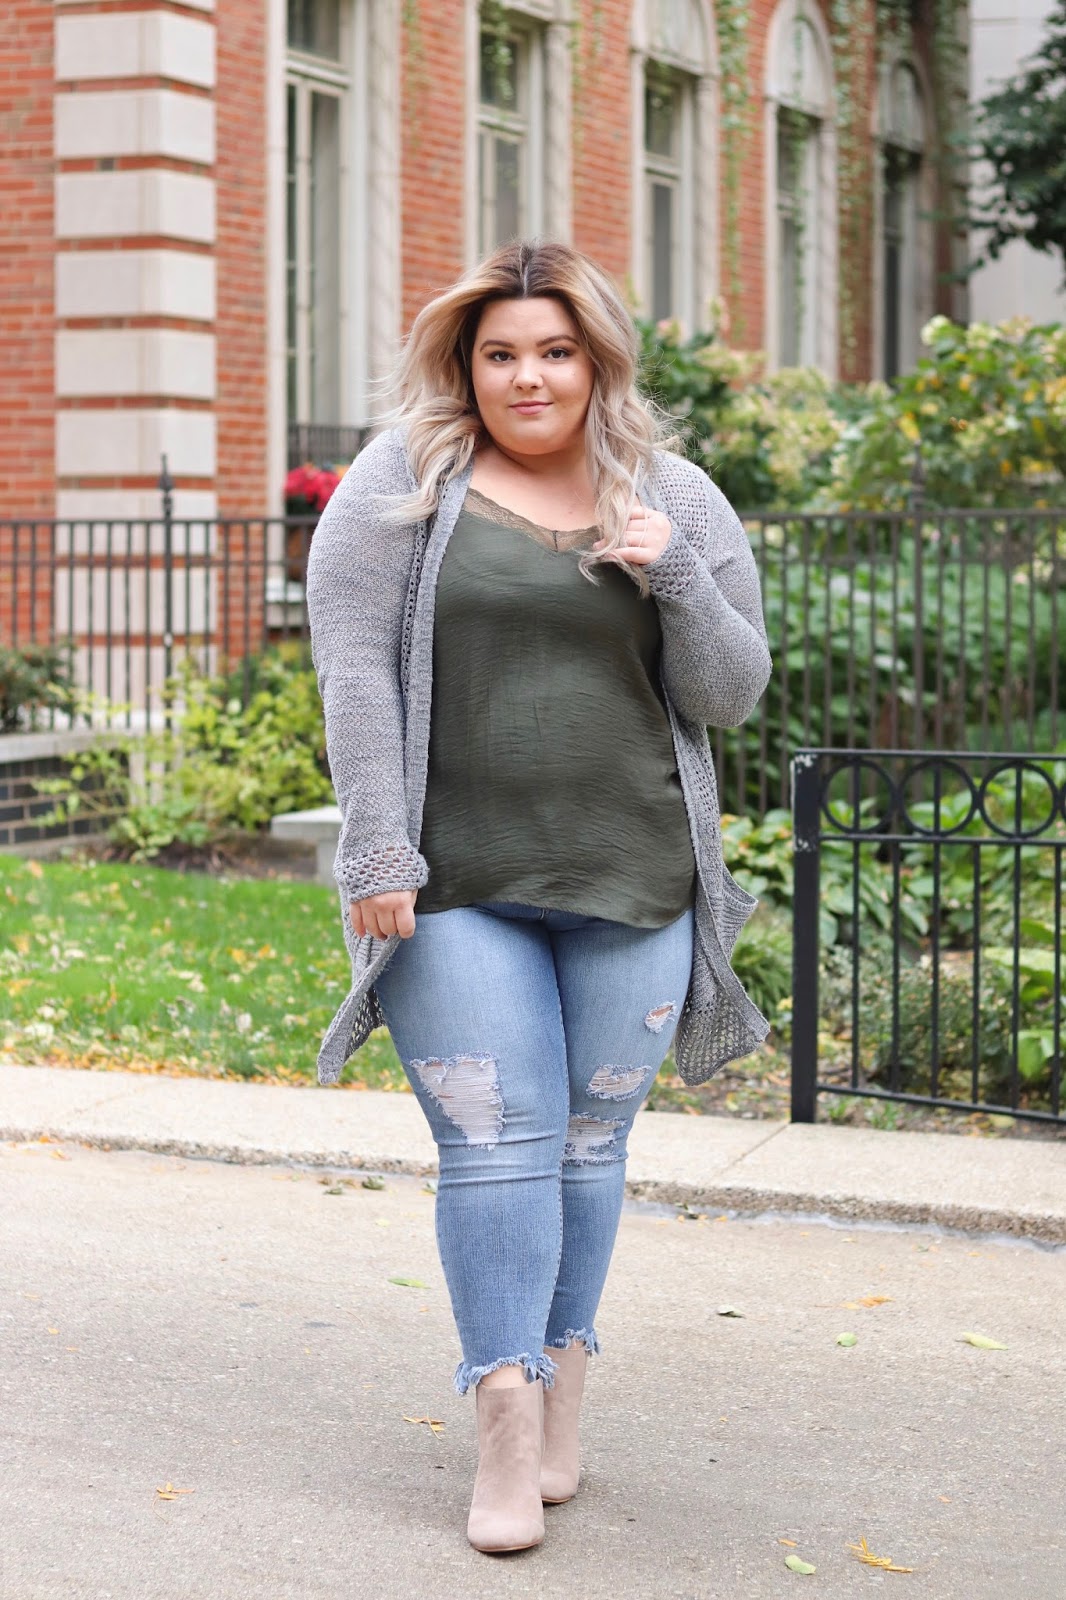 natalie Craig, natalie in the city, plus size fashion blogger, fashion blogger, Chicago, confidence and curves, wide ankle boots, wide fit boots, plus size boots, plus size clothing, affordable plus size clothes, scorch magazine, plus size model, Chicago model, Chicago fashion, plus model magazine